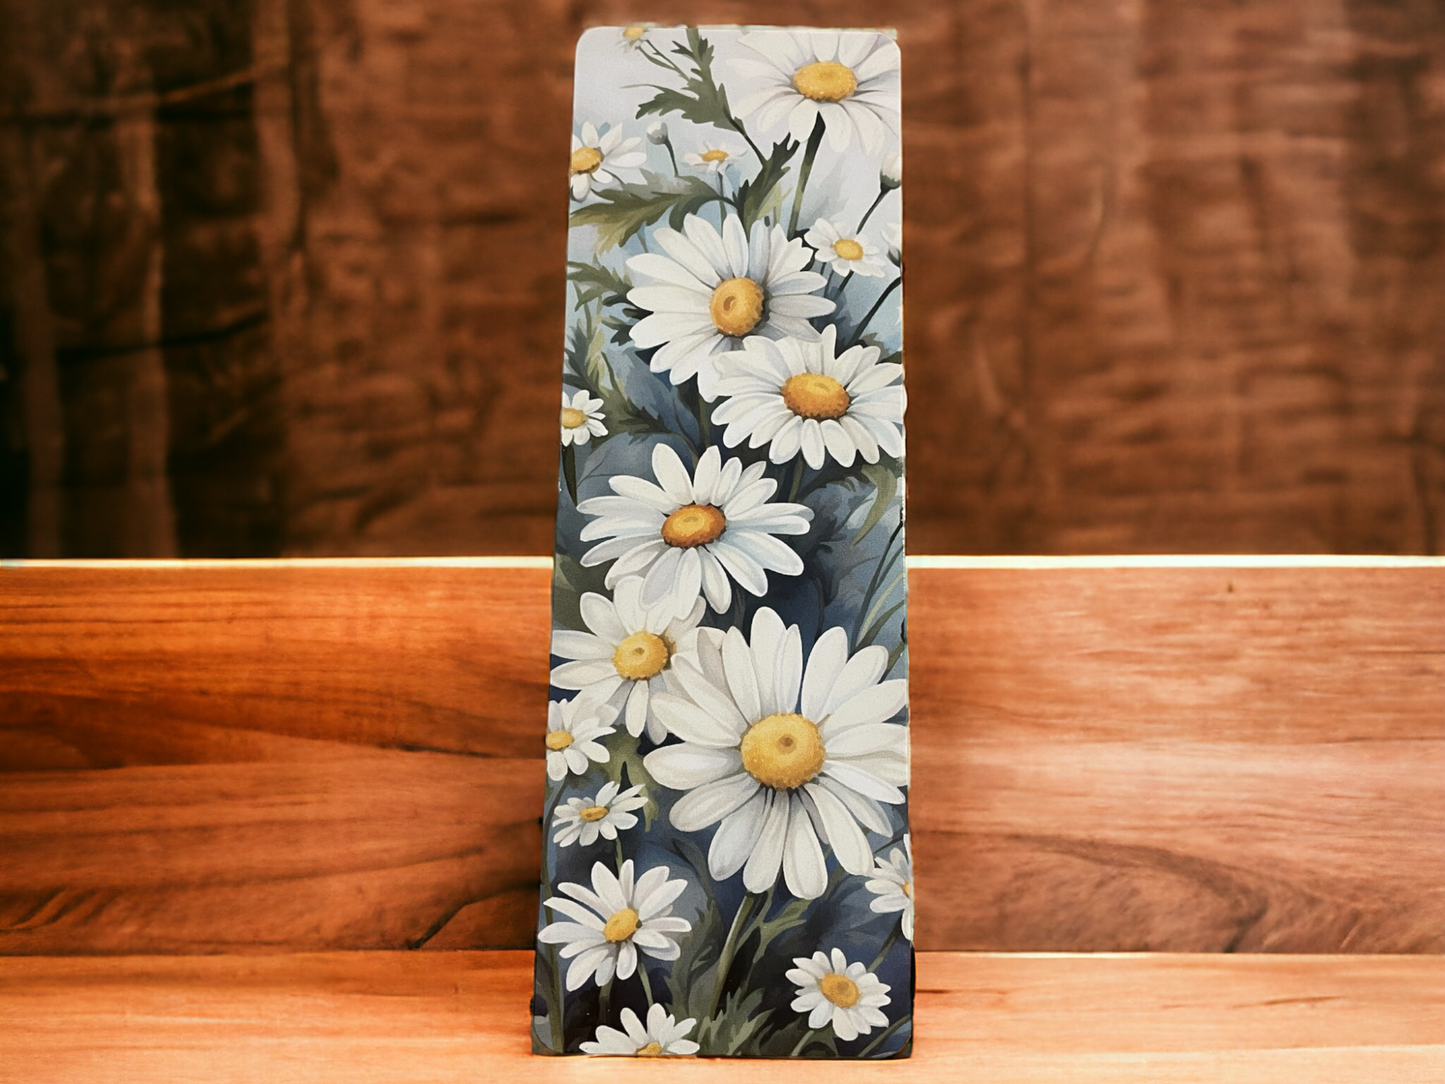 Lovely illustrated printed bookmark, Page Saver, Book Lover Gift, Daisies